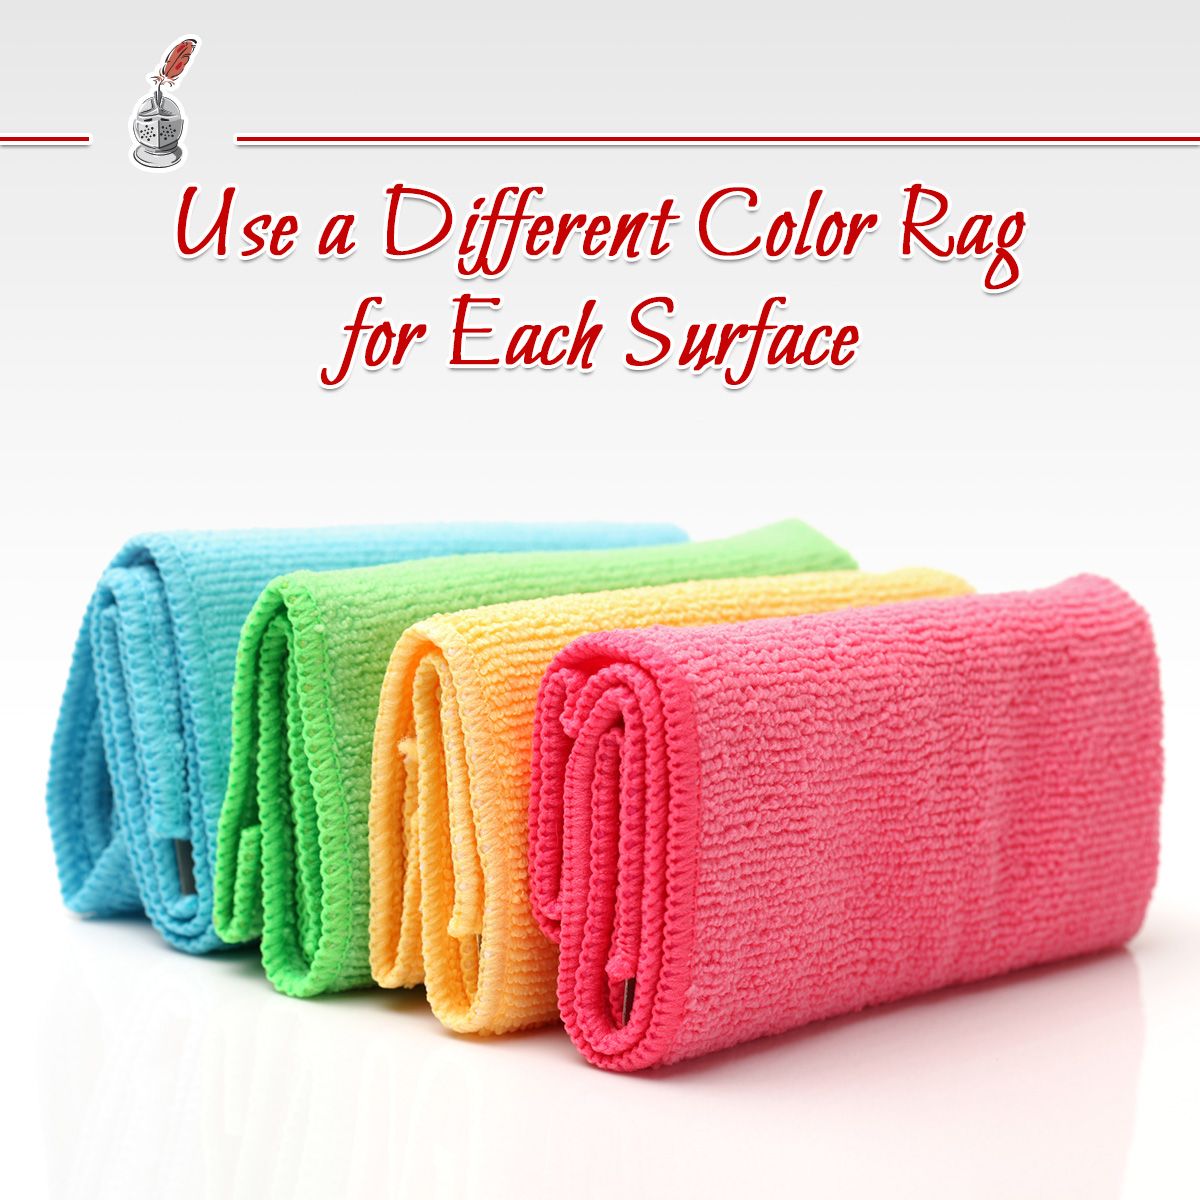 Use a Different Color Rag for Each Surface